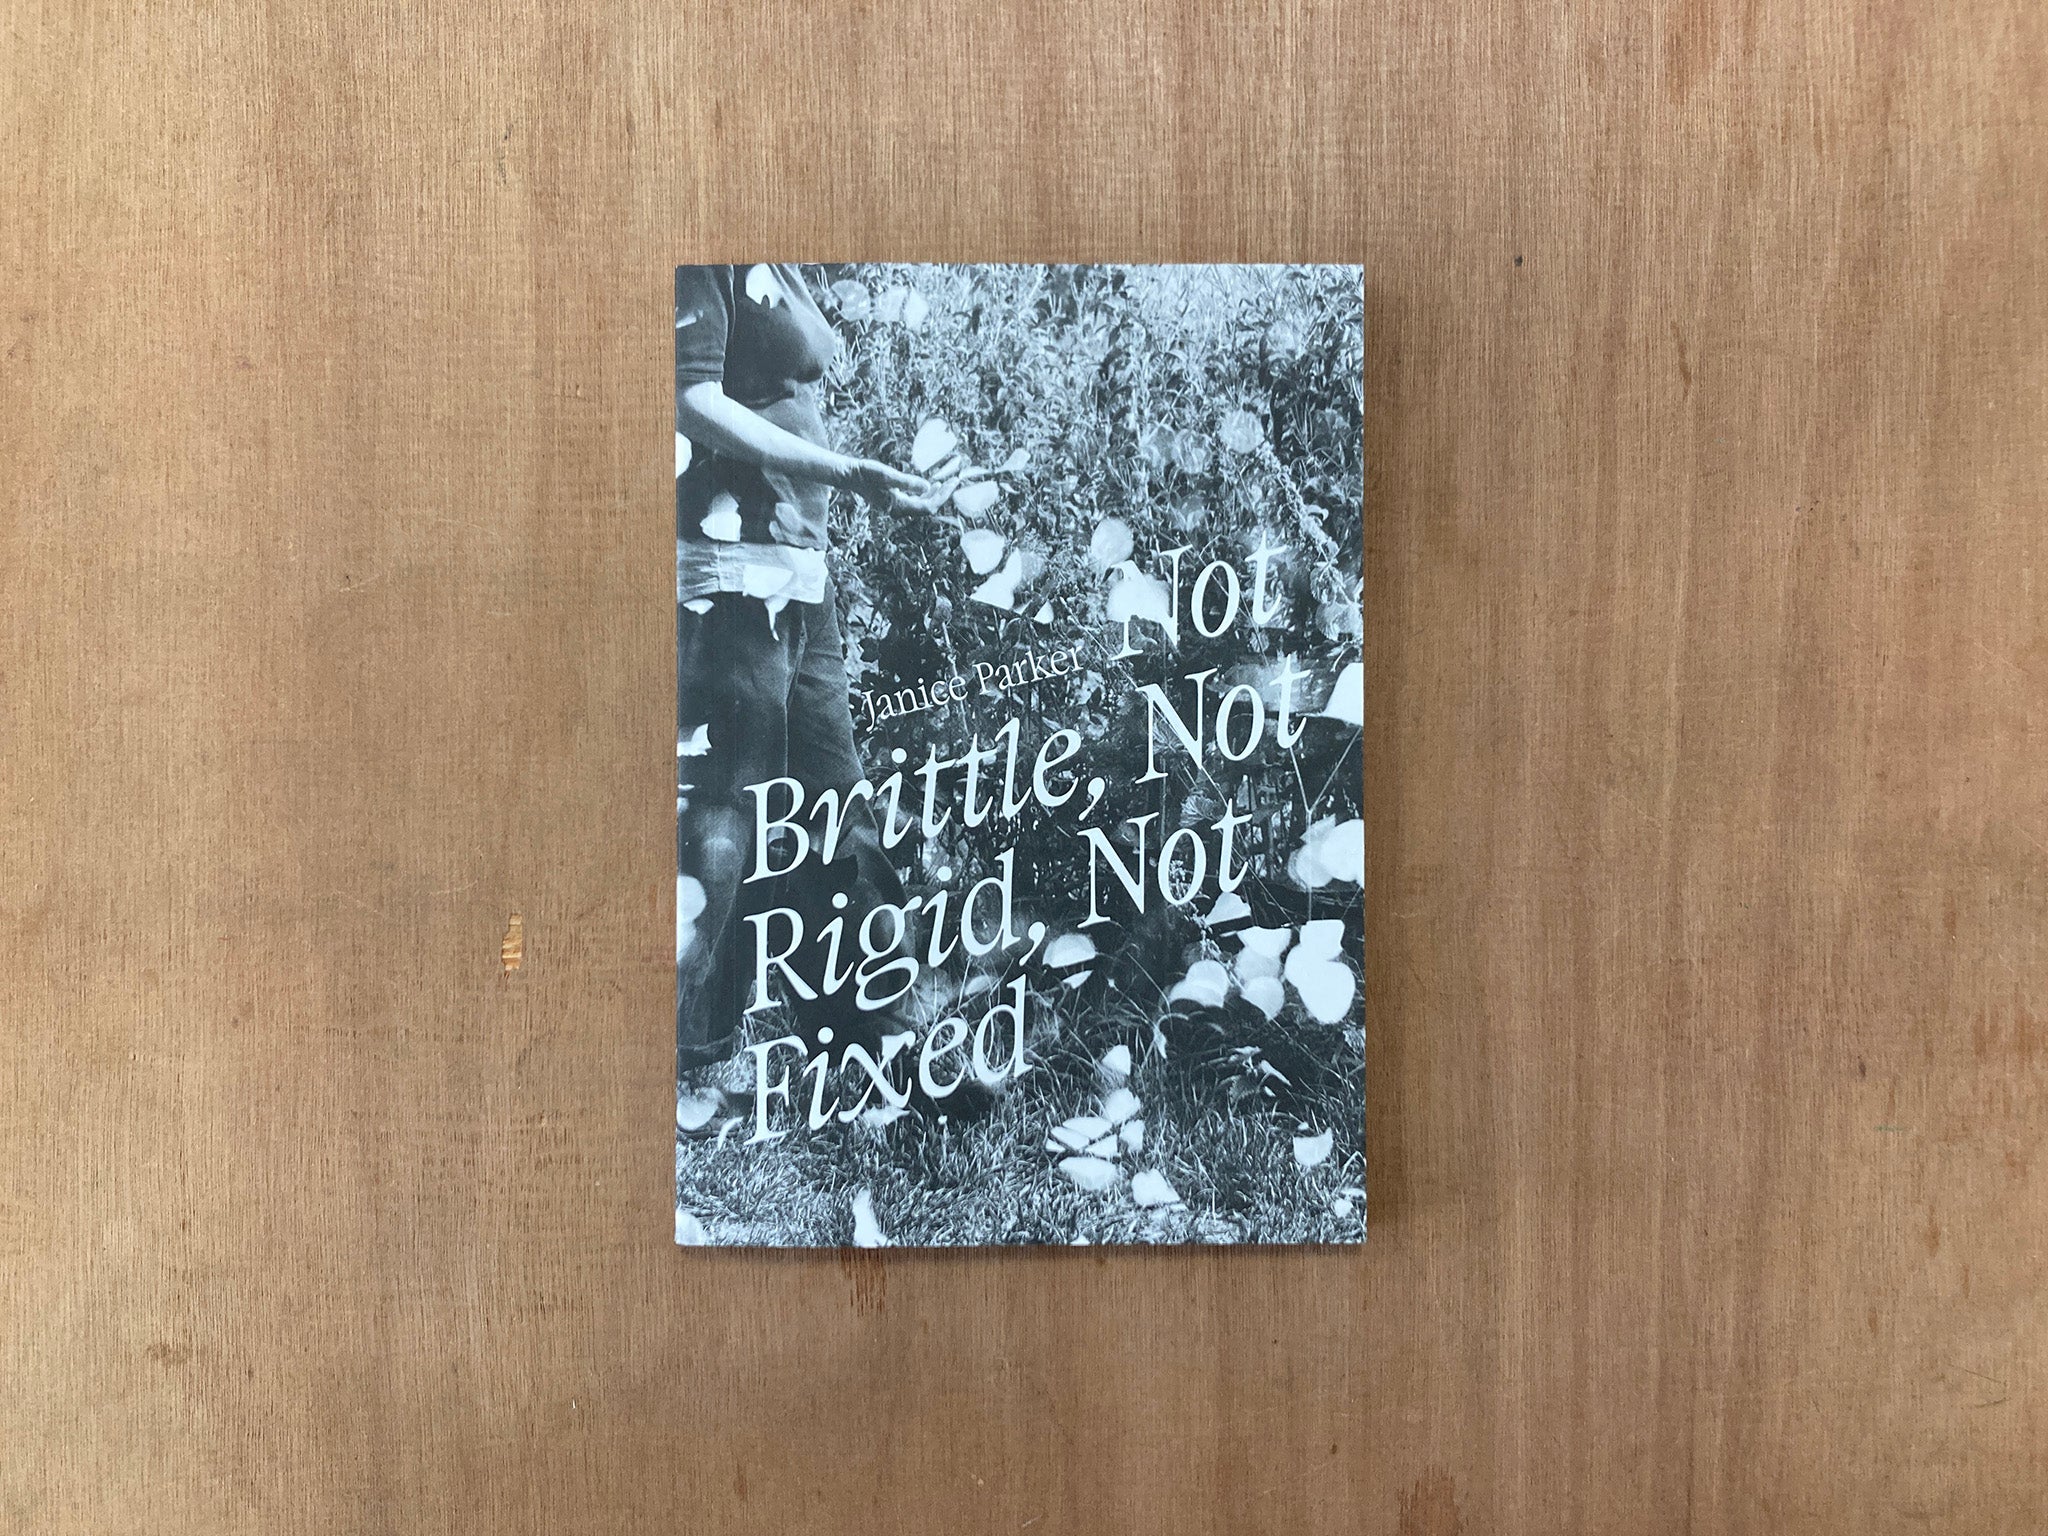 NOT BRITTLE, NOT RIGID, NOT FIXED by Janice Parker and Emmie McLuskey Et al.